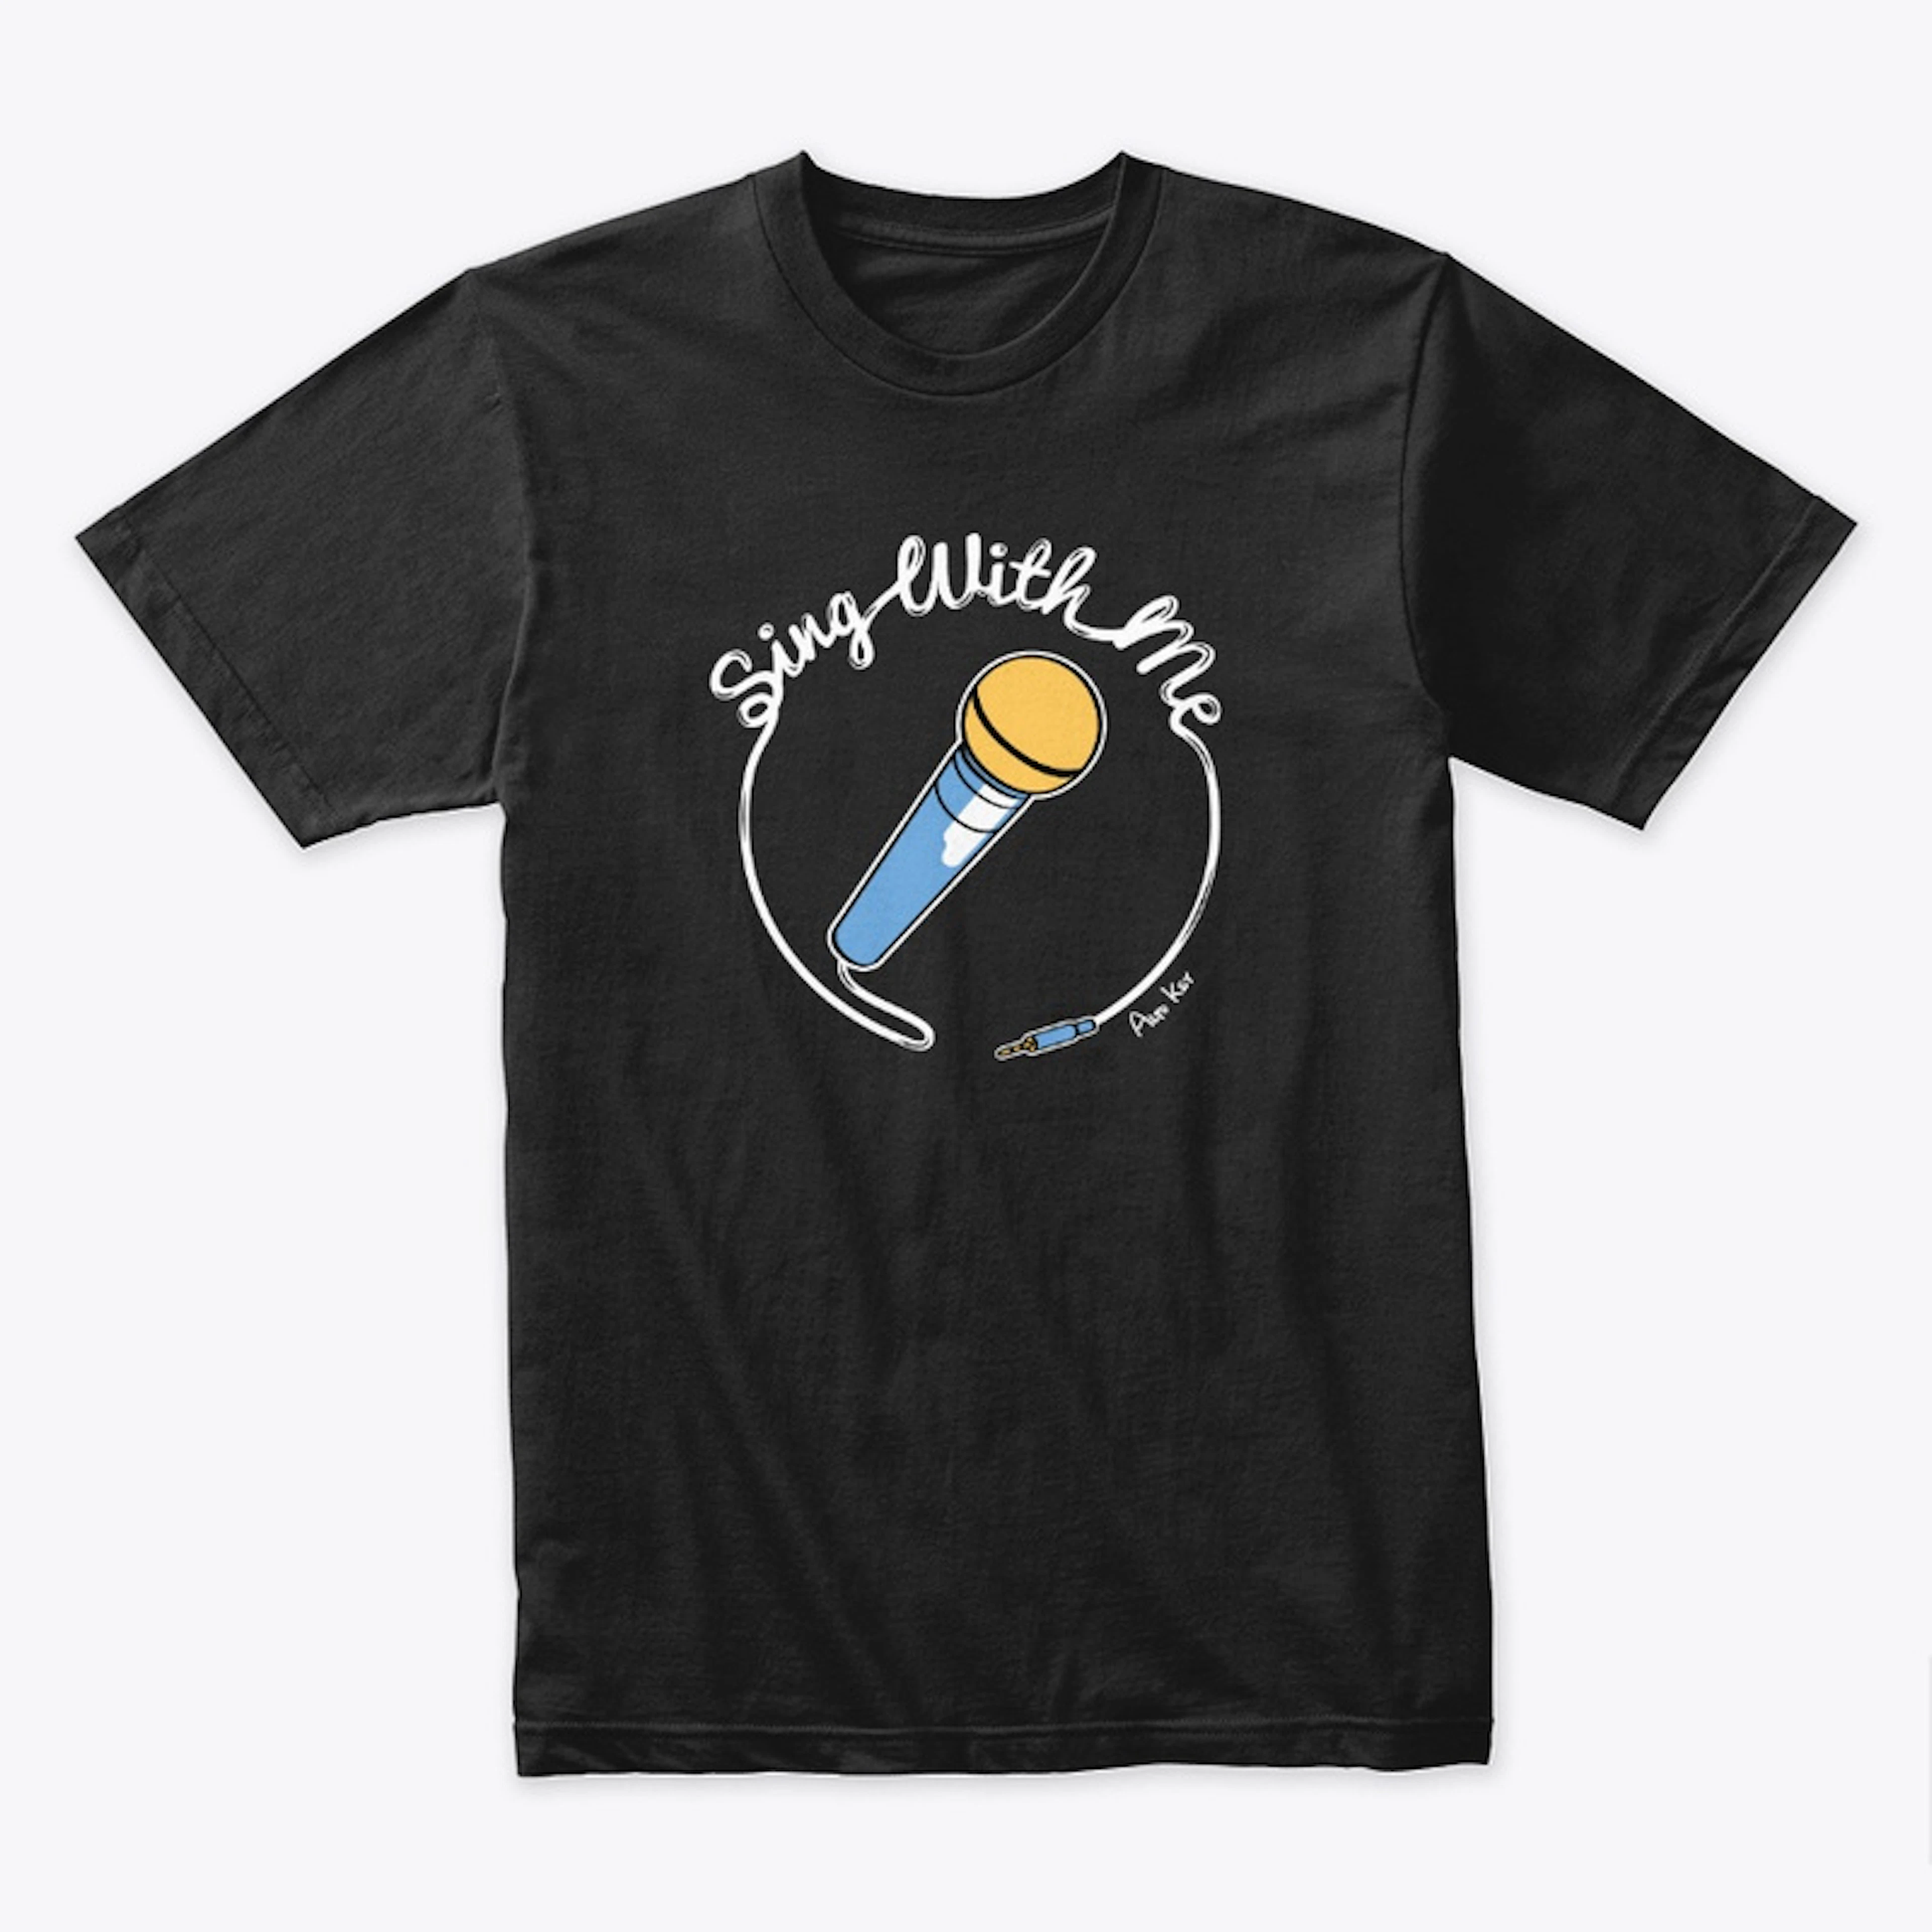 "sing with me" shirt